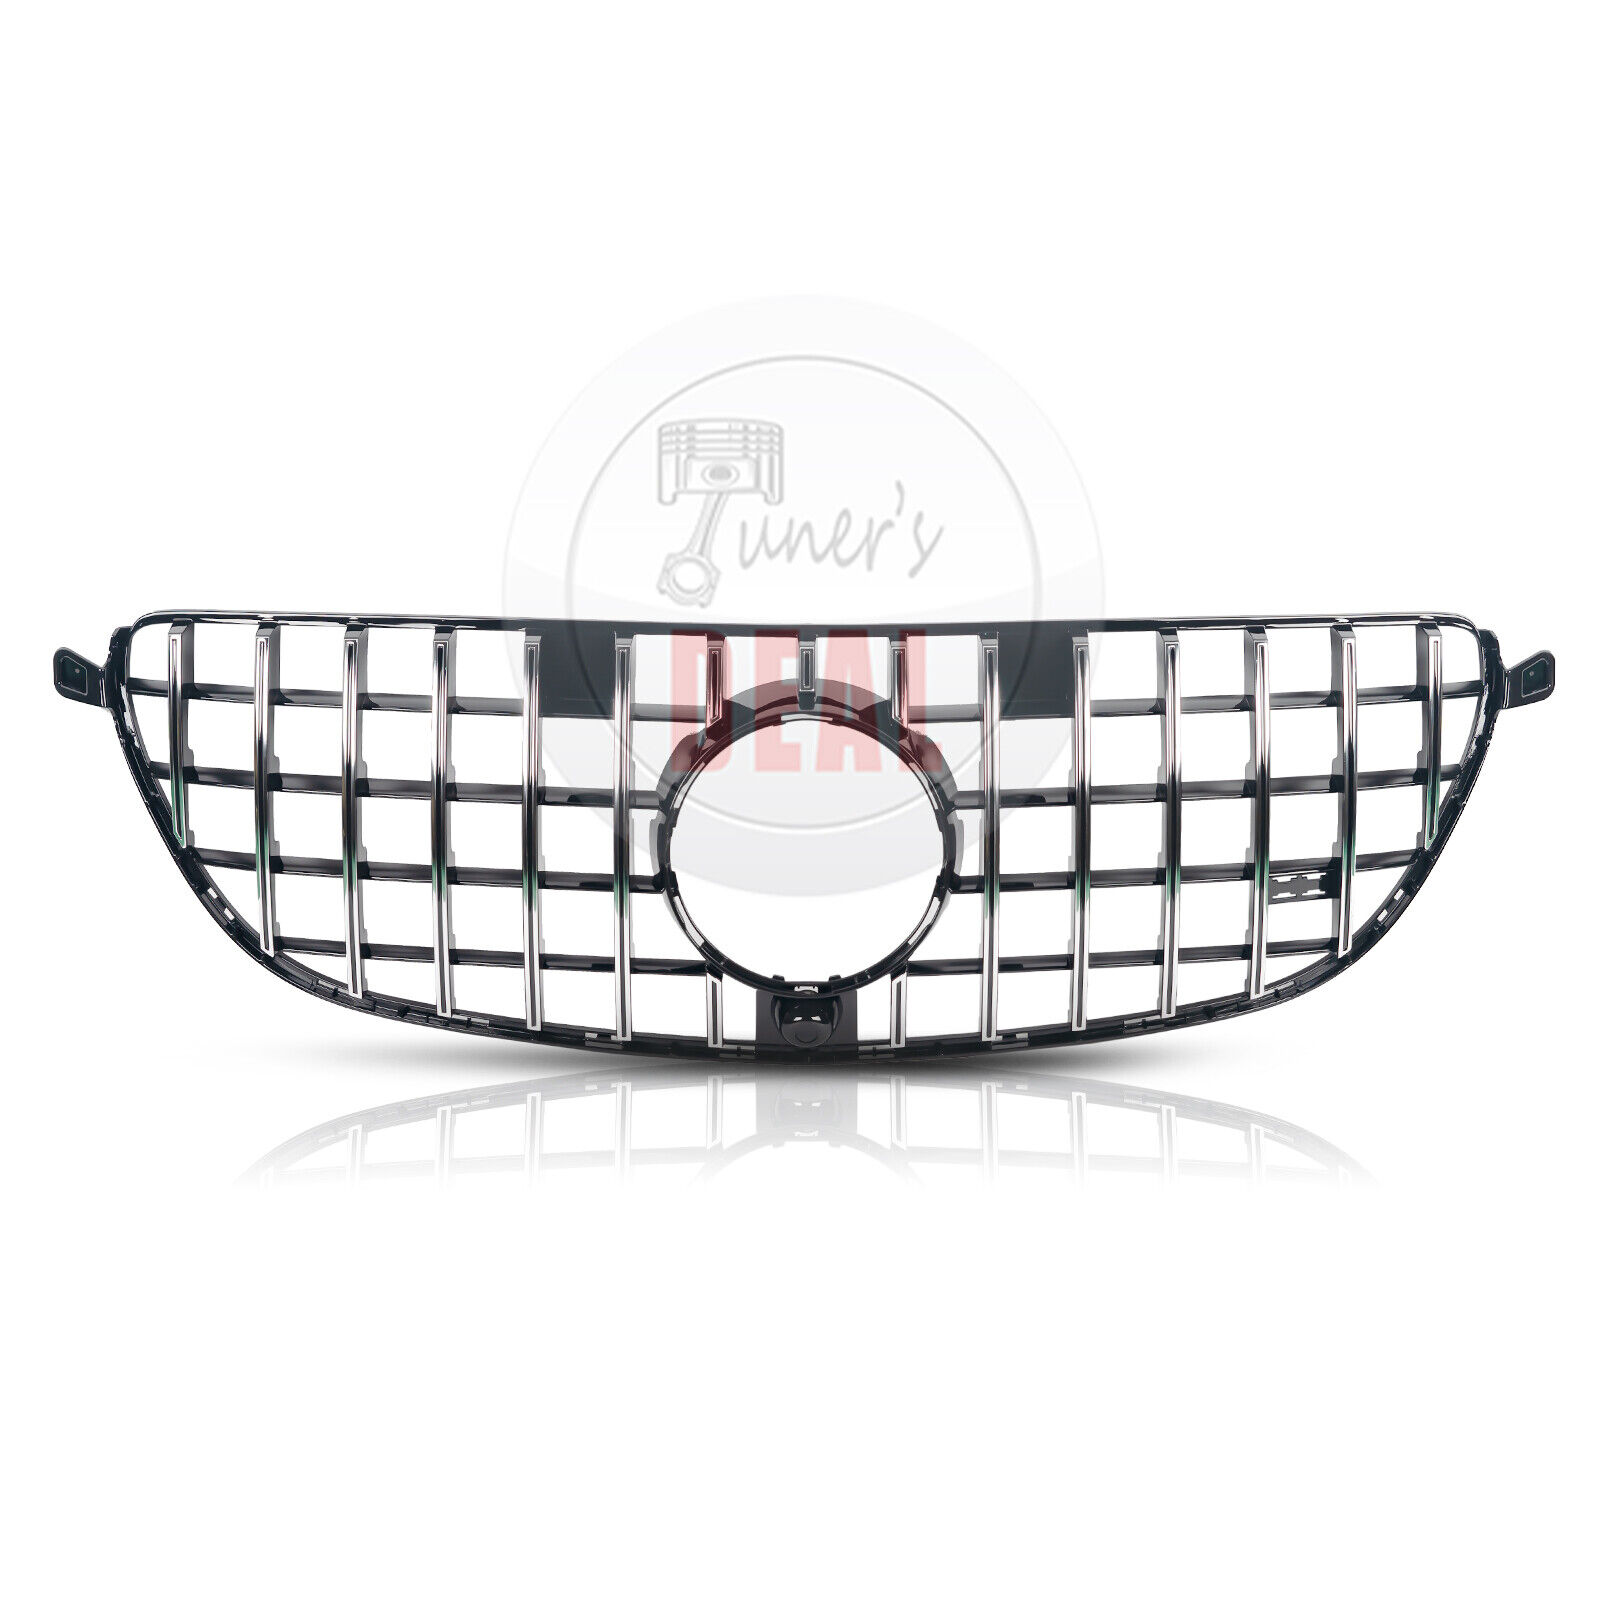 GLE63 AMG ONLY GRILLE For 2016-2019 Mercedes Benz Coupe Chrome Black Gt grill